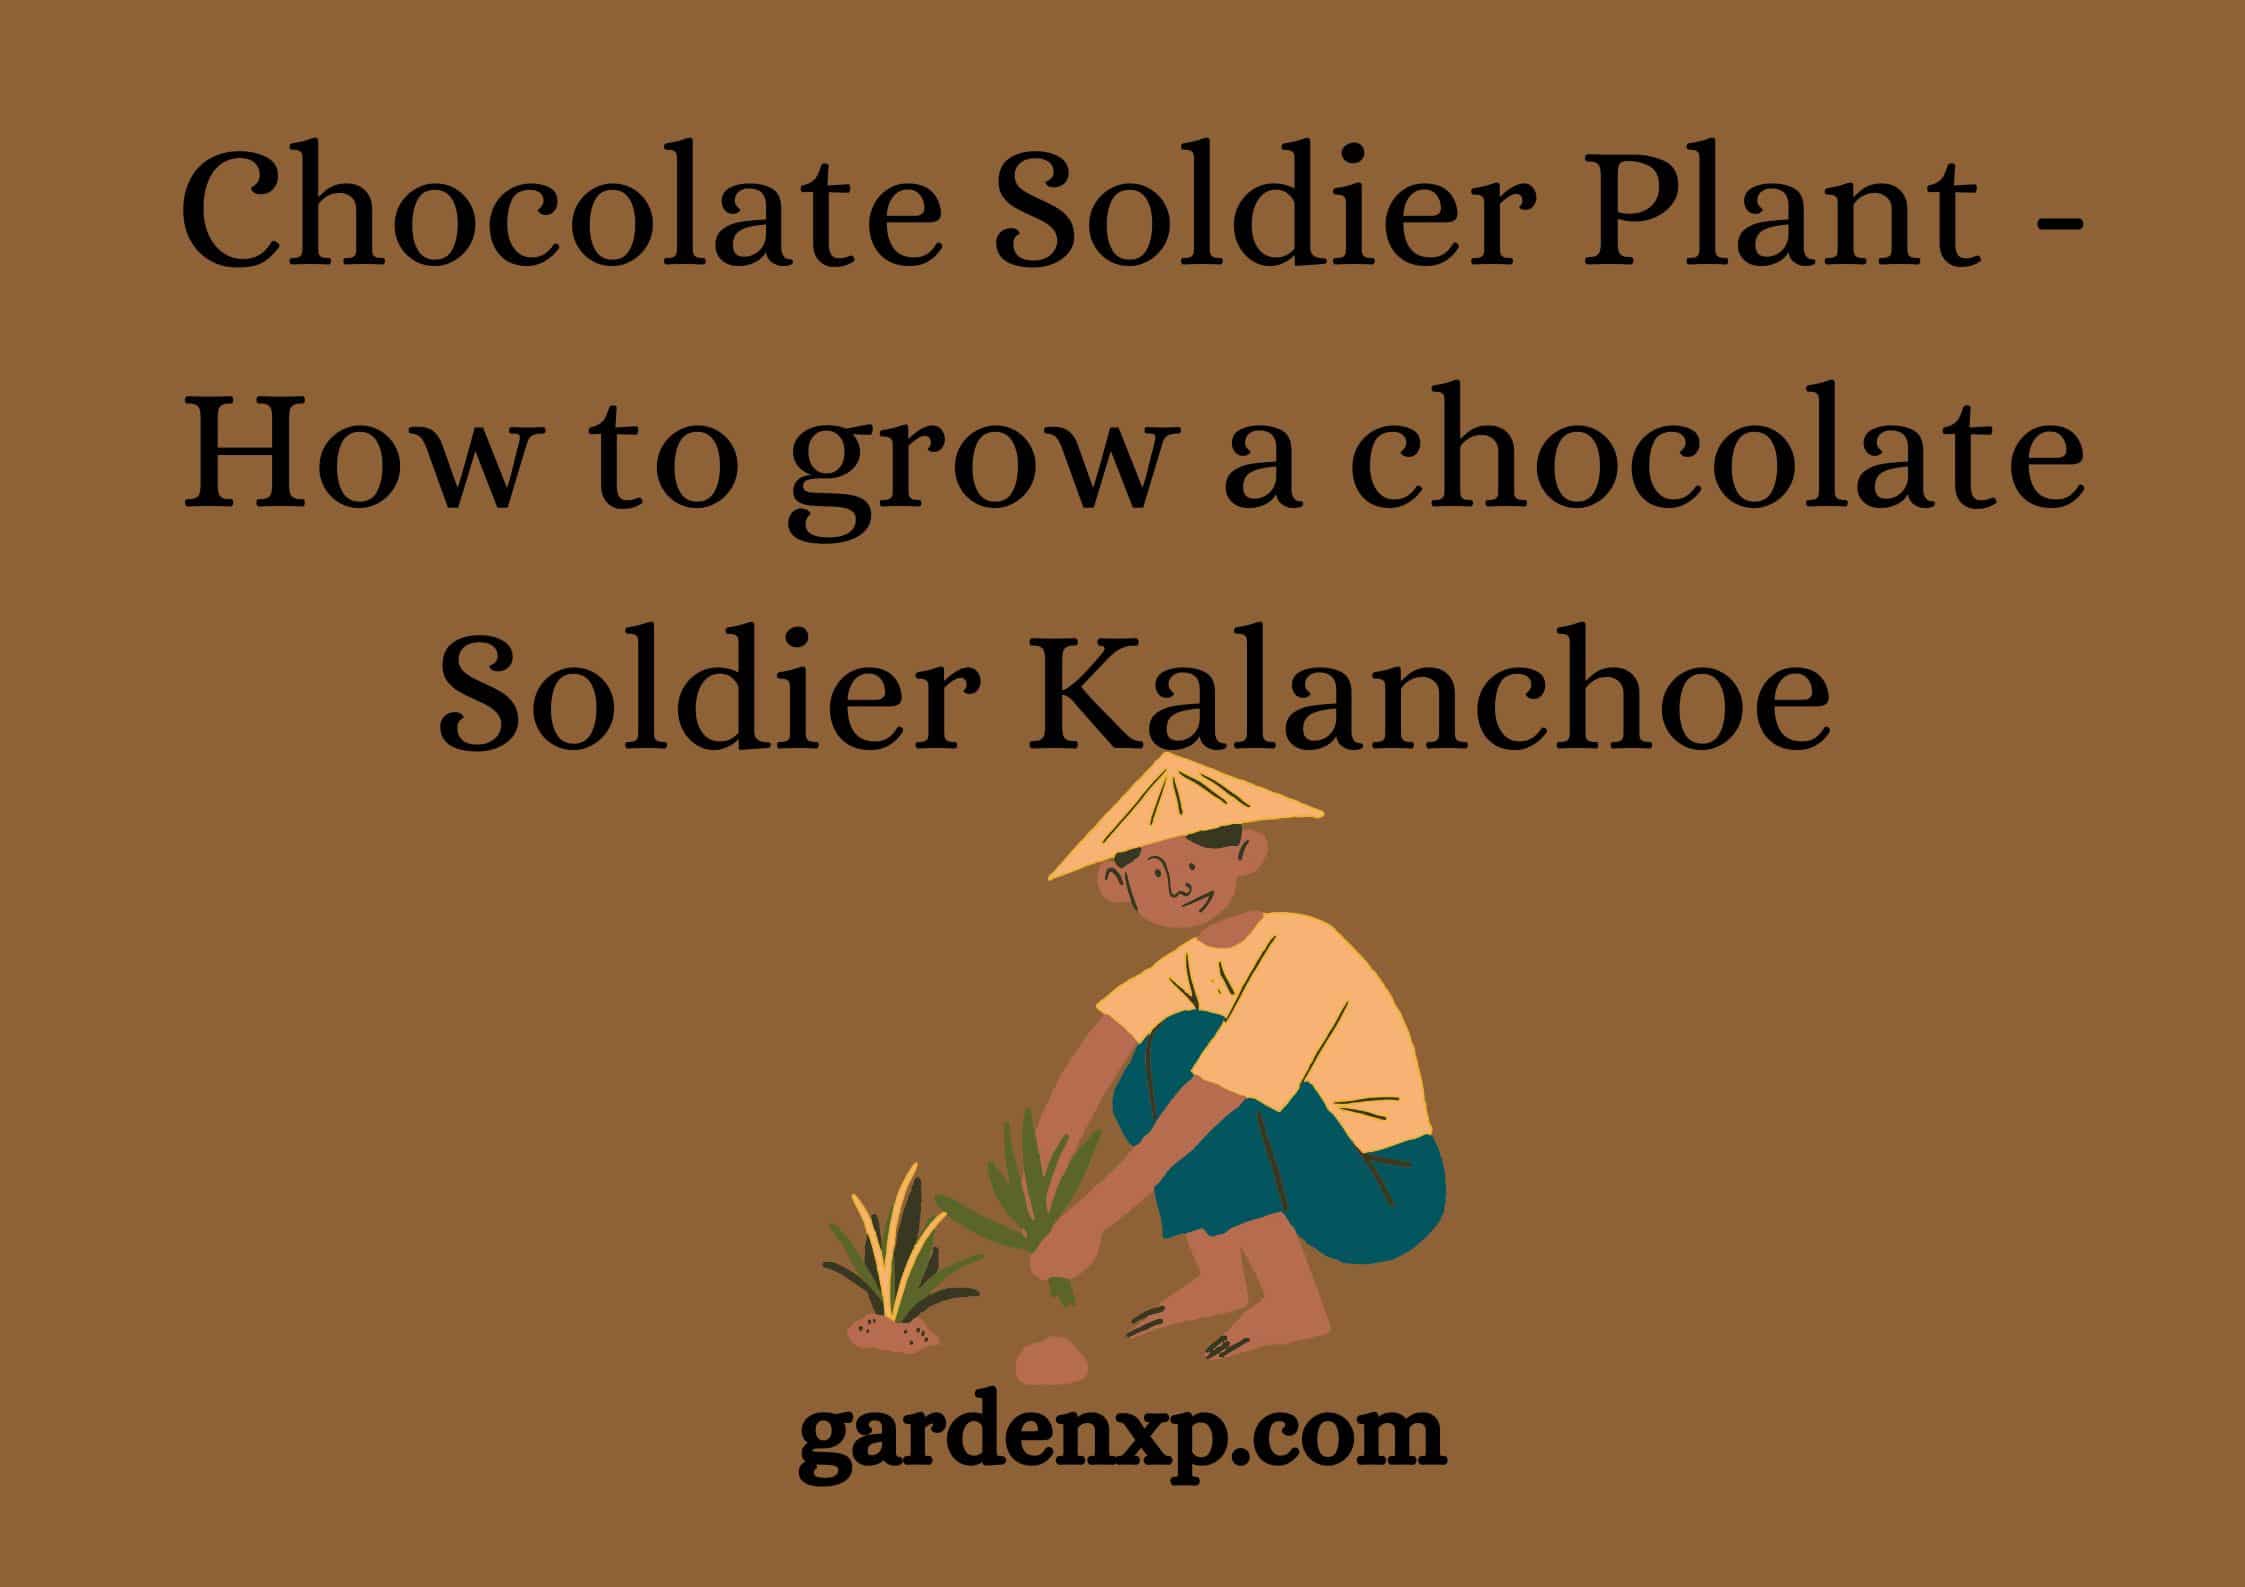 Chocolate Soldier Plant - How to grow a chocolate Soldier Kalanchoe